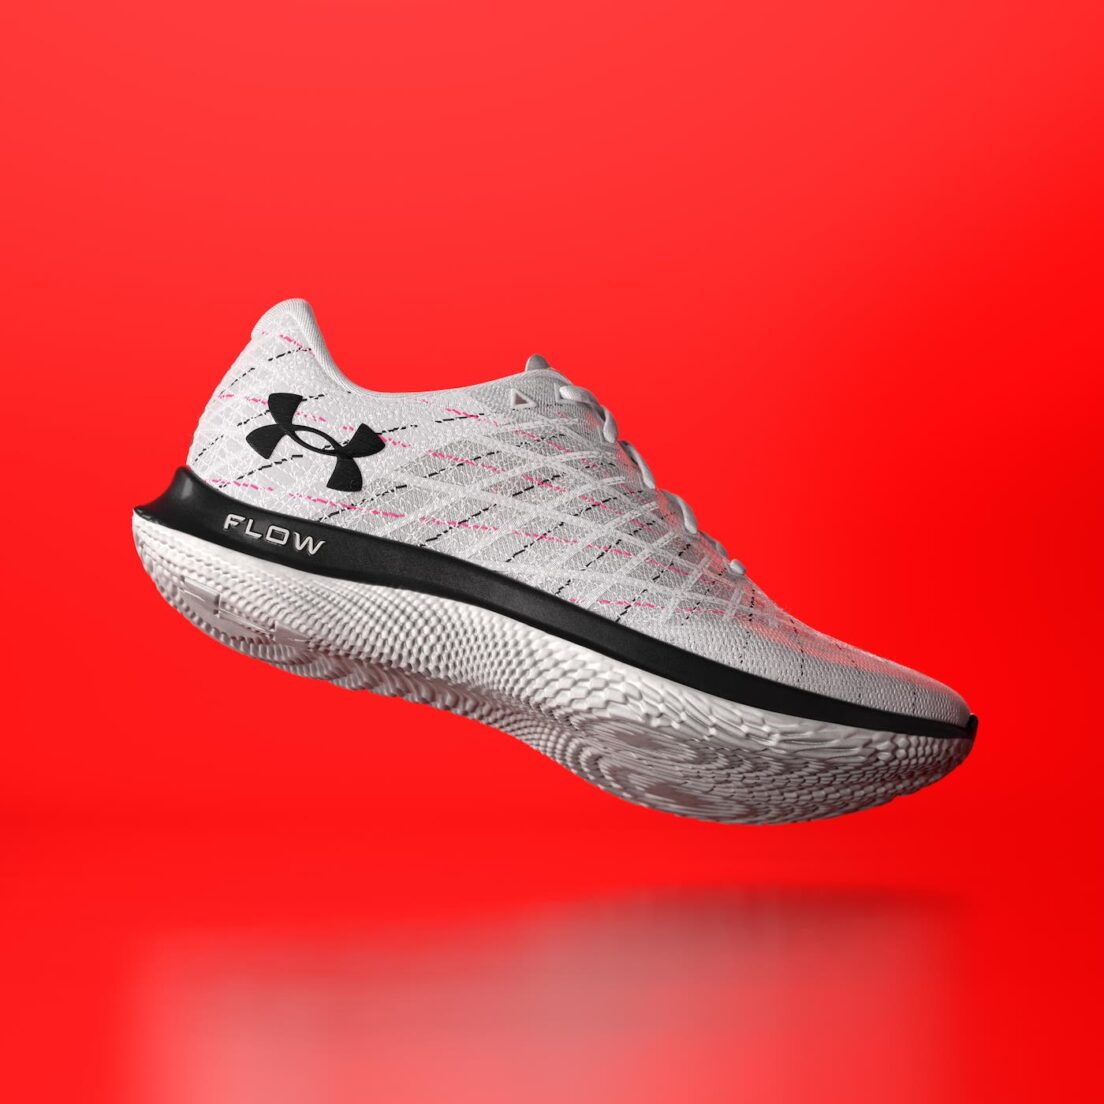 Under Armour Unveils Its Fastest Performance Running Shoe Yet | Sustain ...